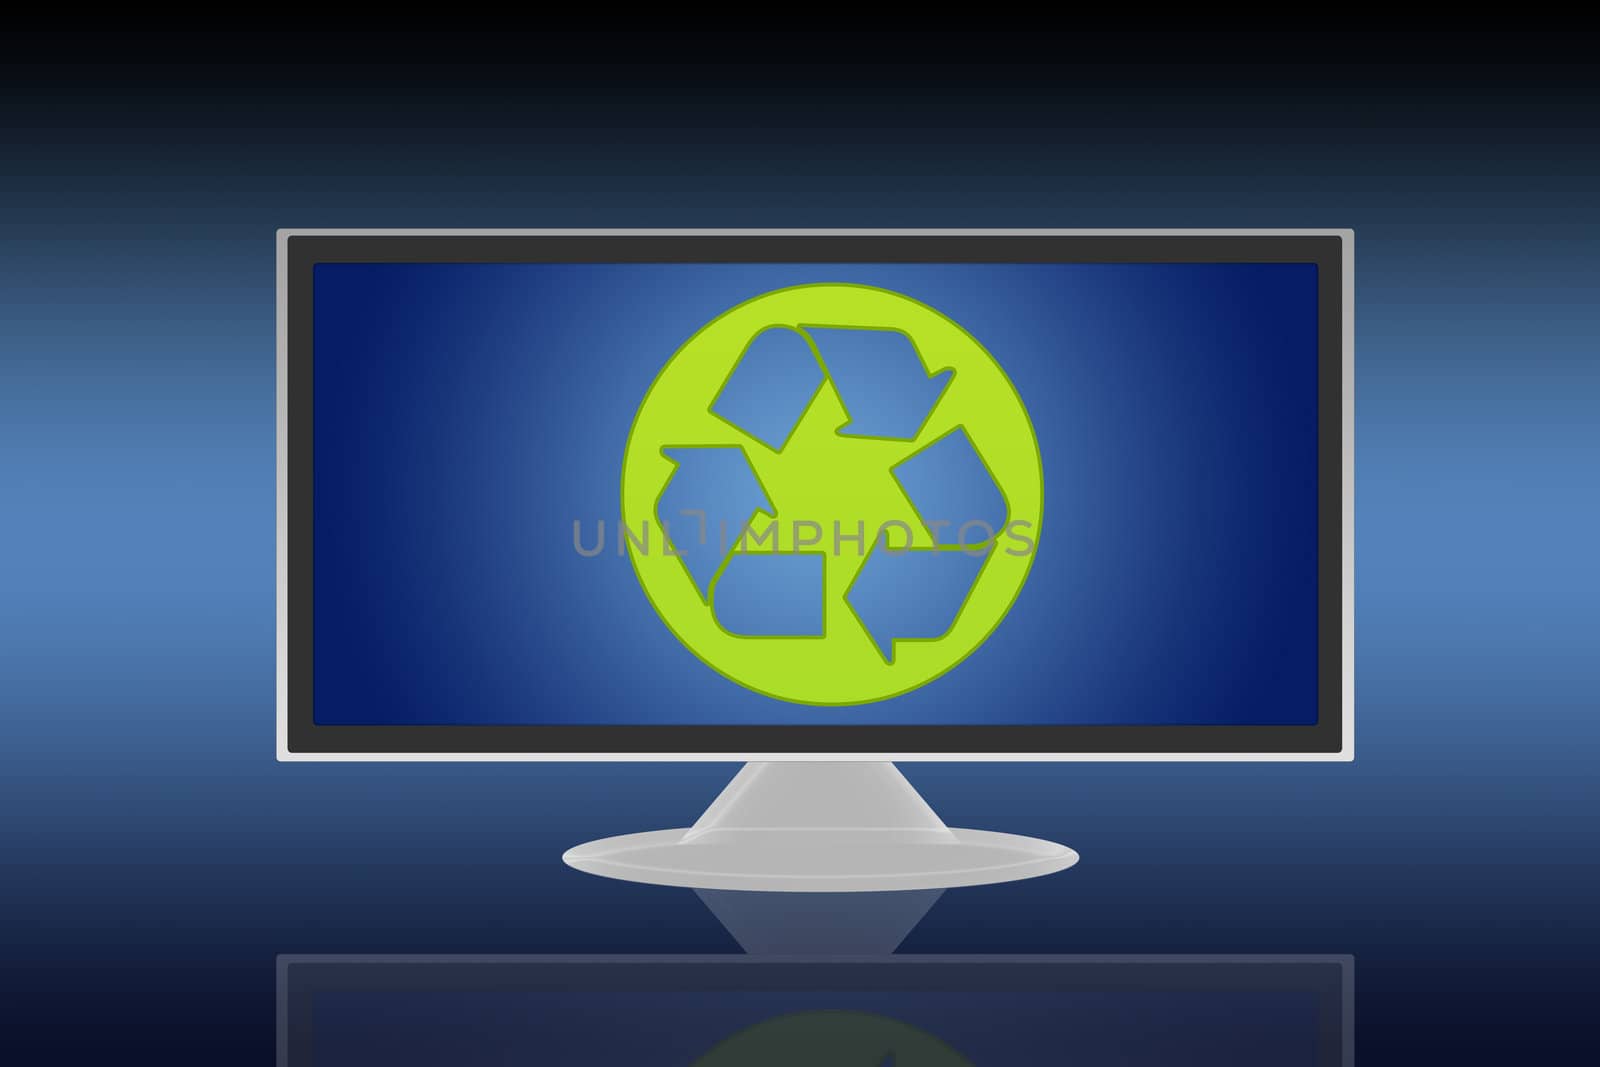 Flat LCD TV-Liquid Crystal Display with recyclable symbol